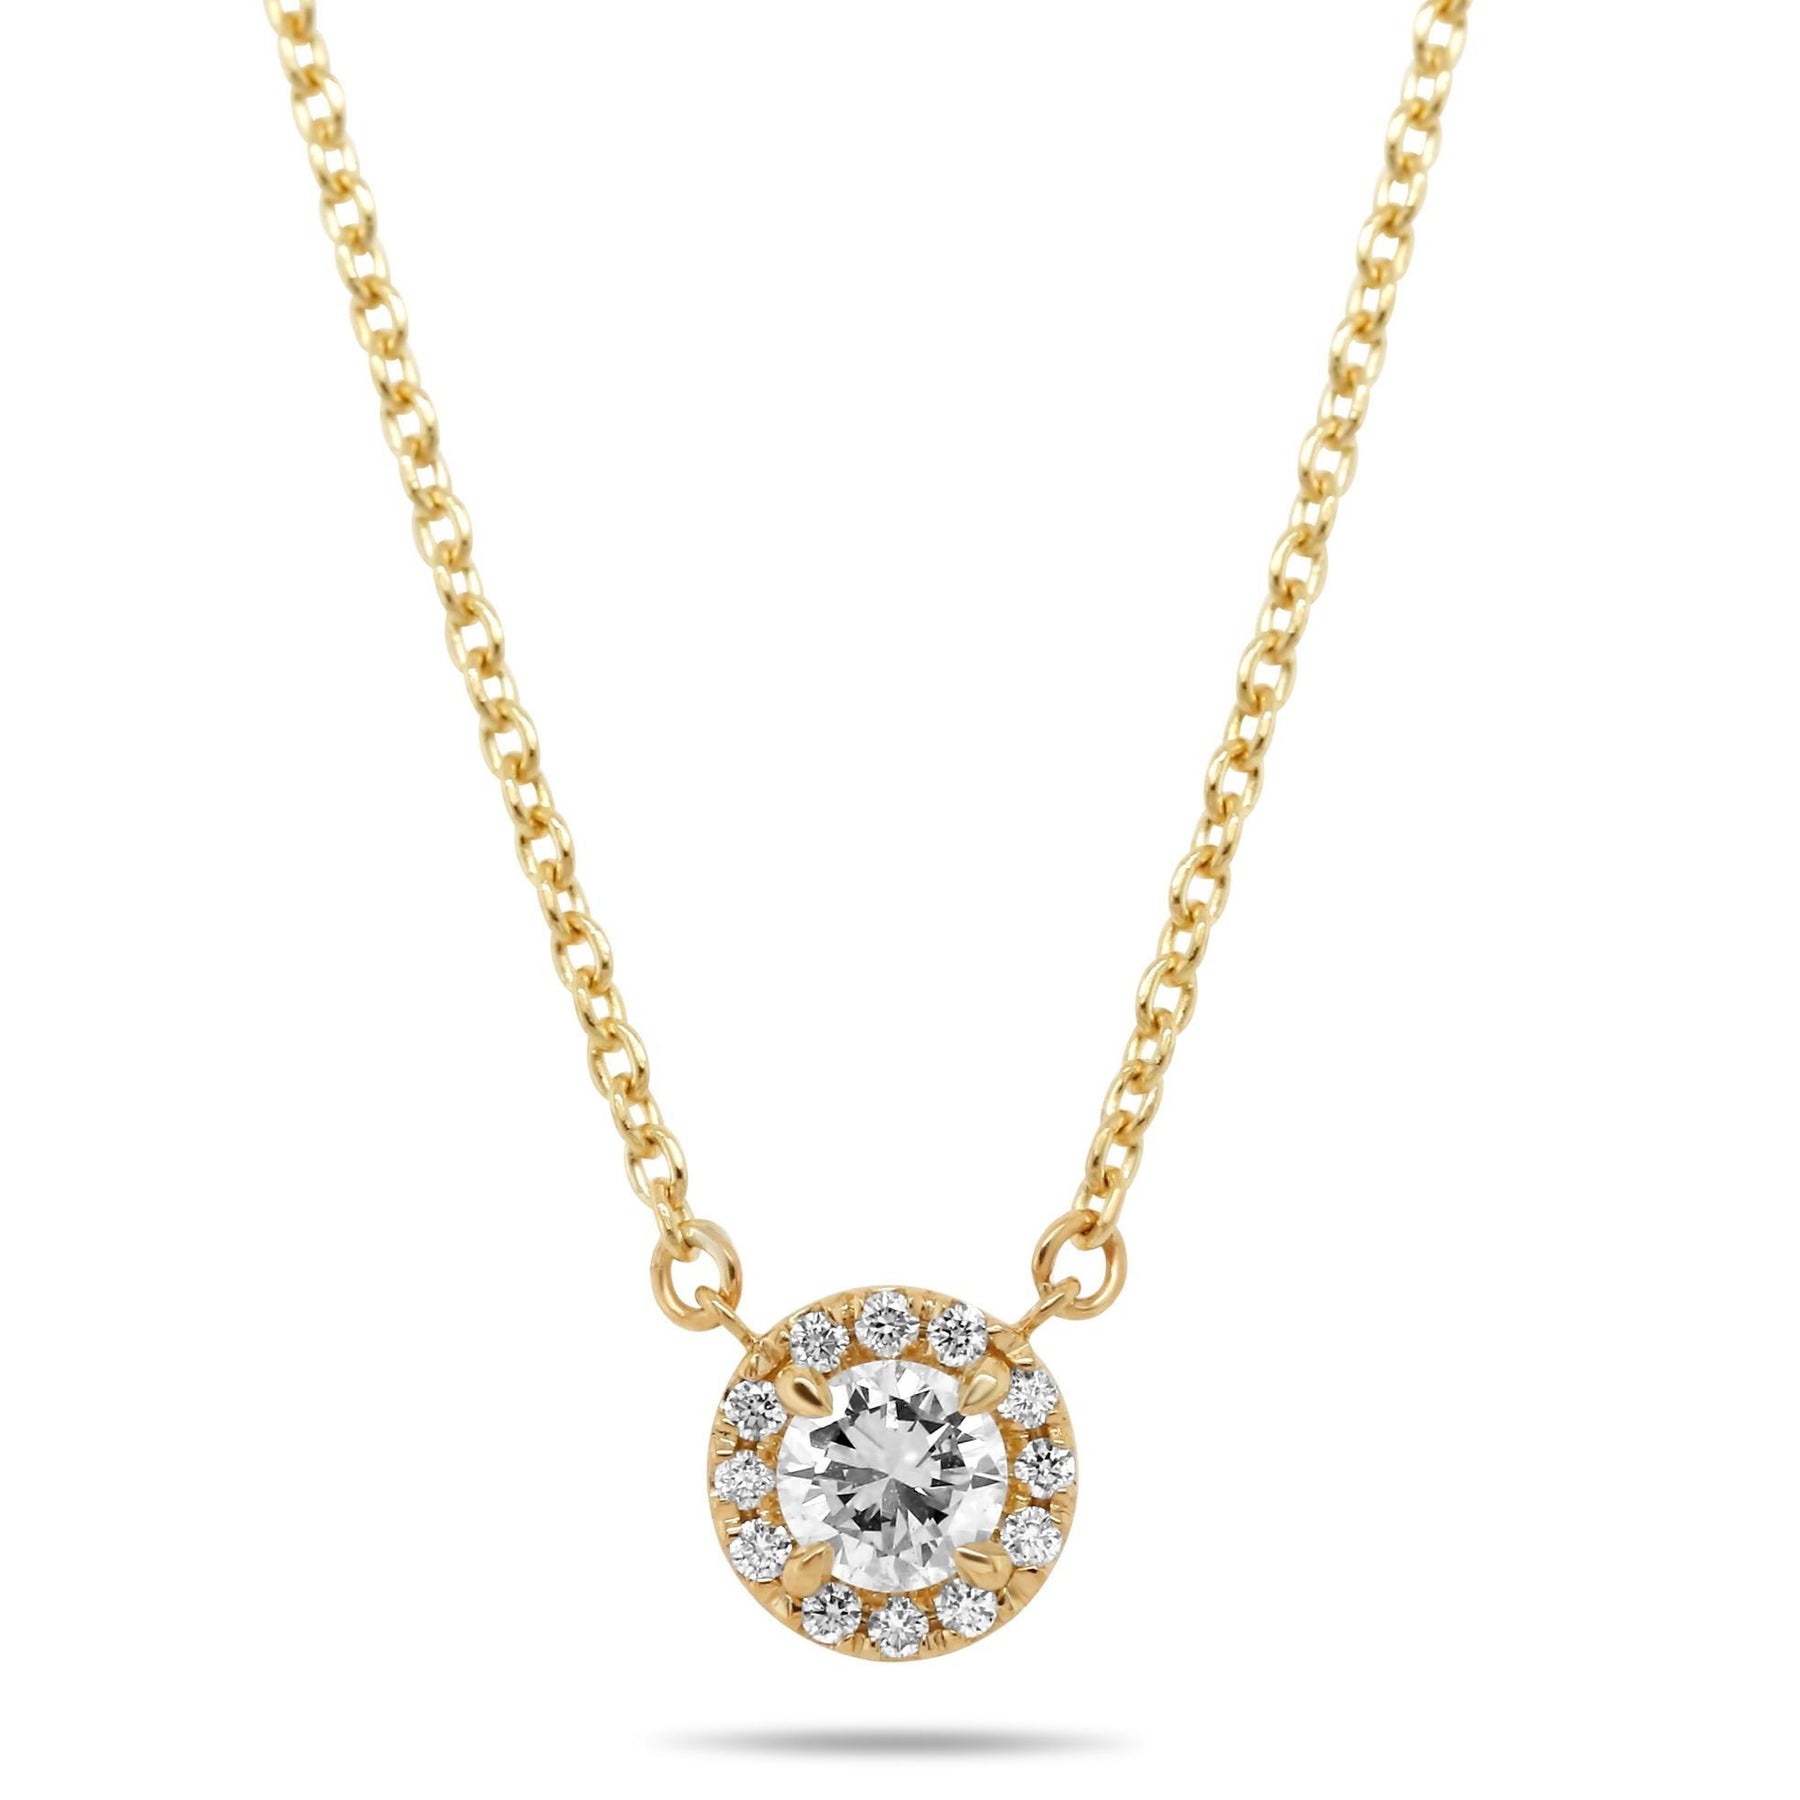 14k yellow gold round diamond necklace with a diamond halo on a 16in chain